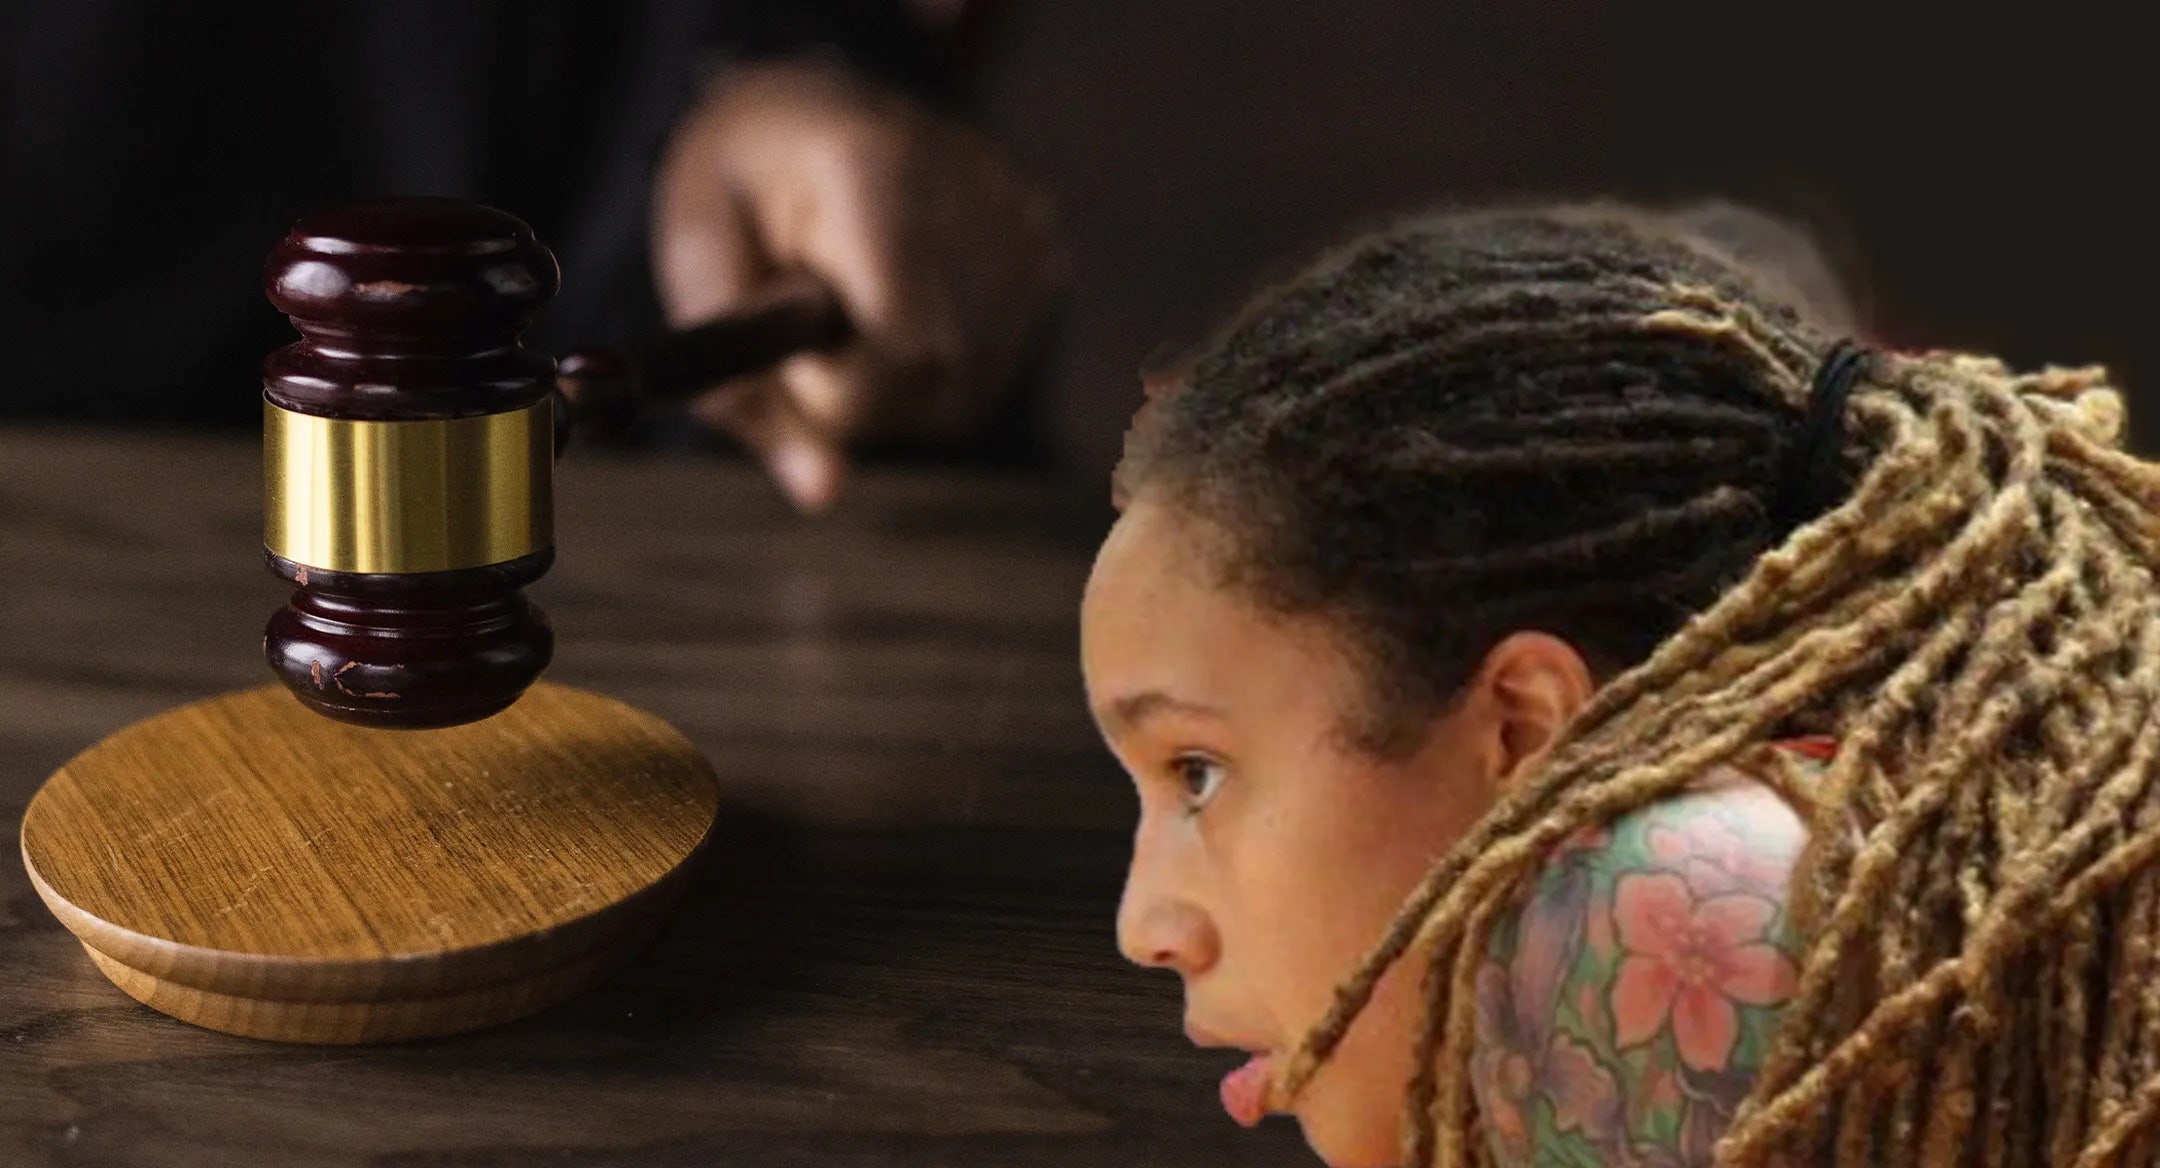 Brittney Griner Appeals 9-Year Sentence Tuesday And Loses: What's Next? Russian Penal Colony Or Prisoner Swap?